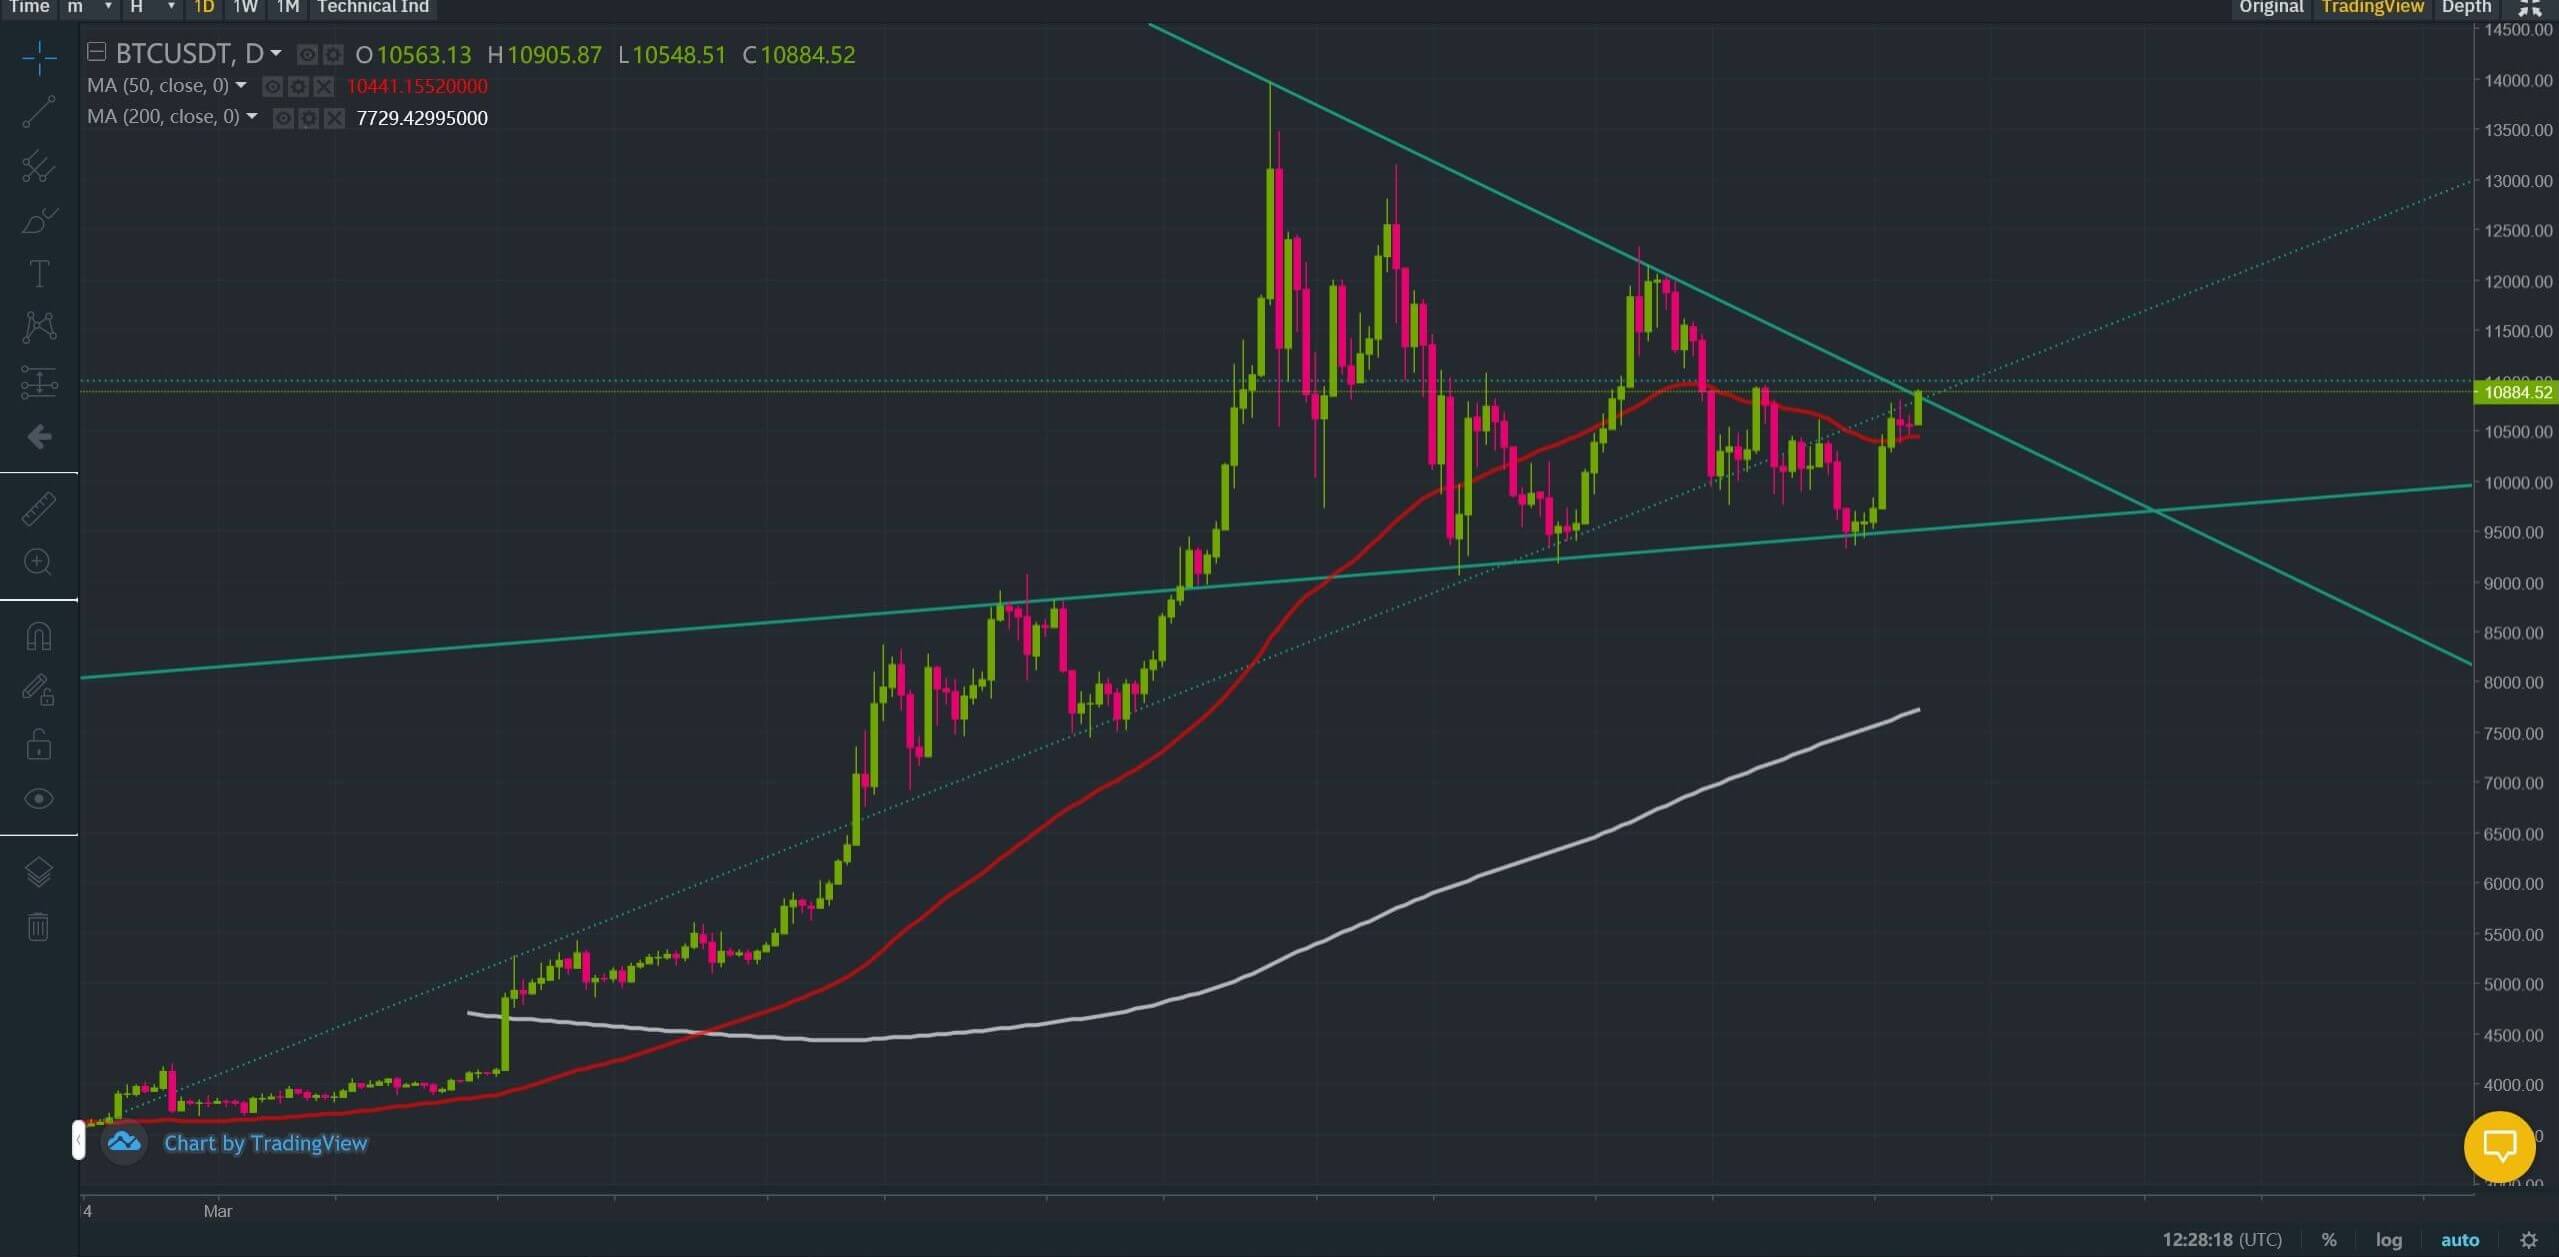 Bitcoin Price Analysis: All eyes on that descending wedge!